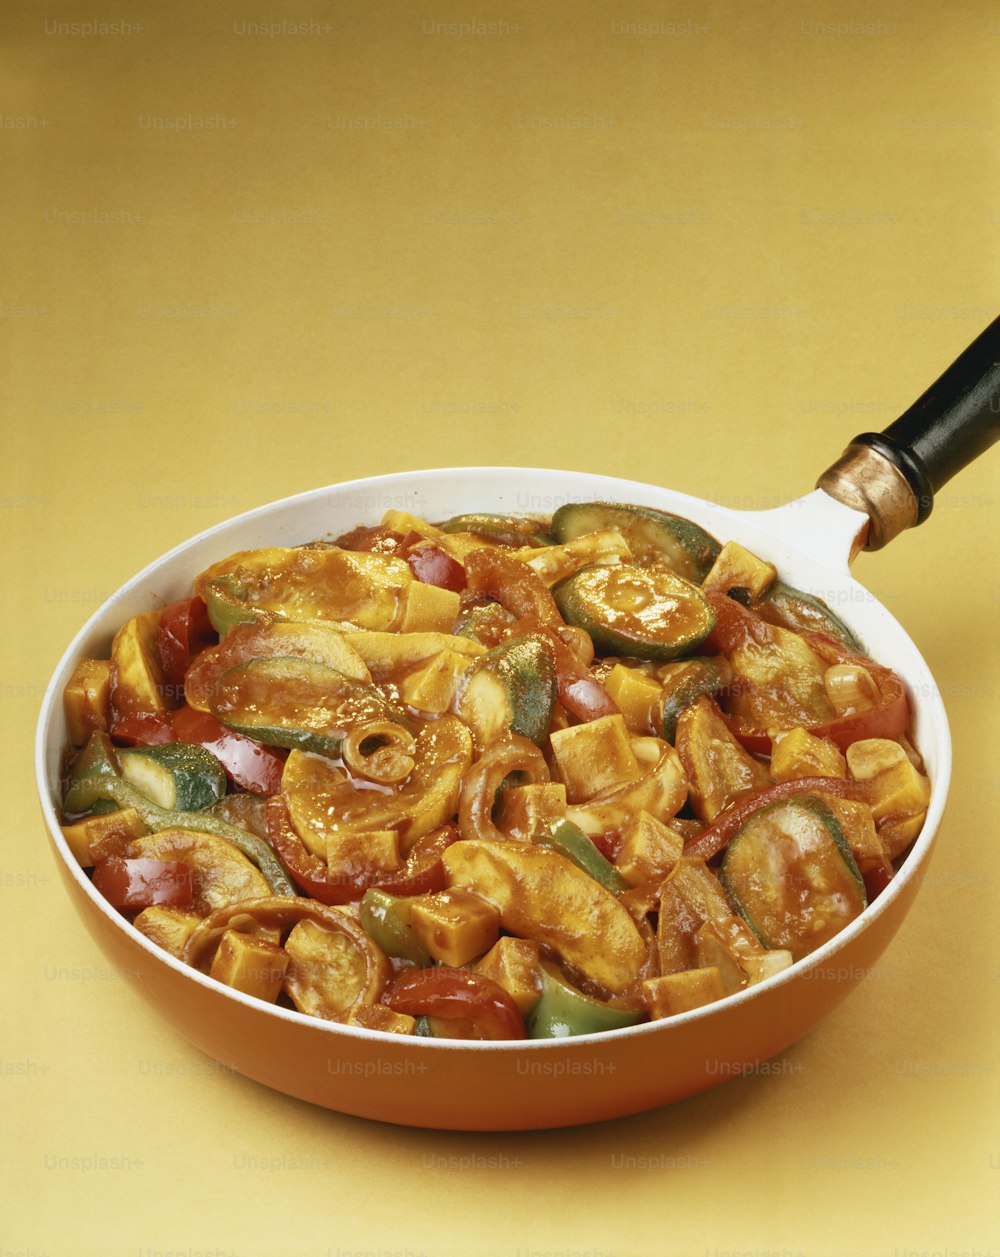 a pan filled with pasta and vegetables on a table